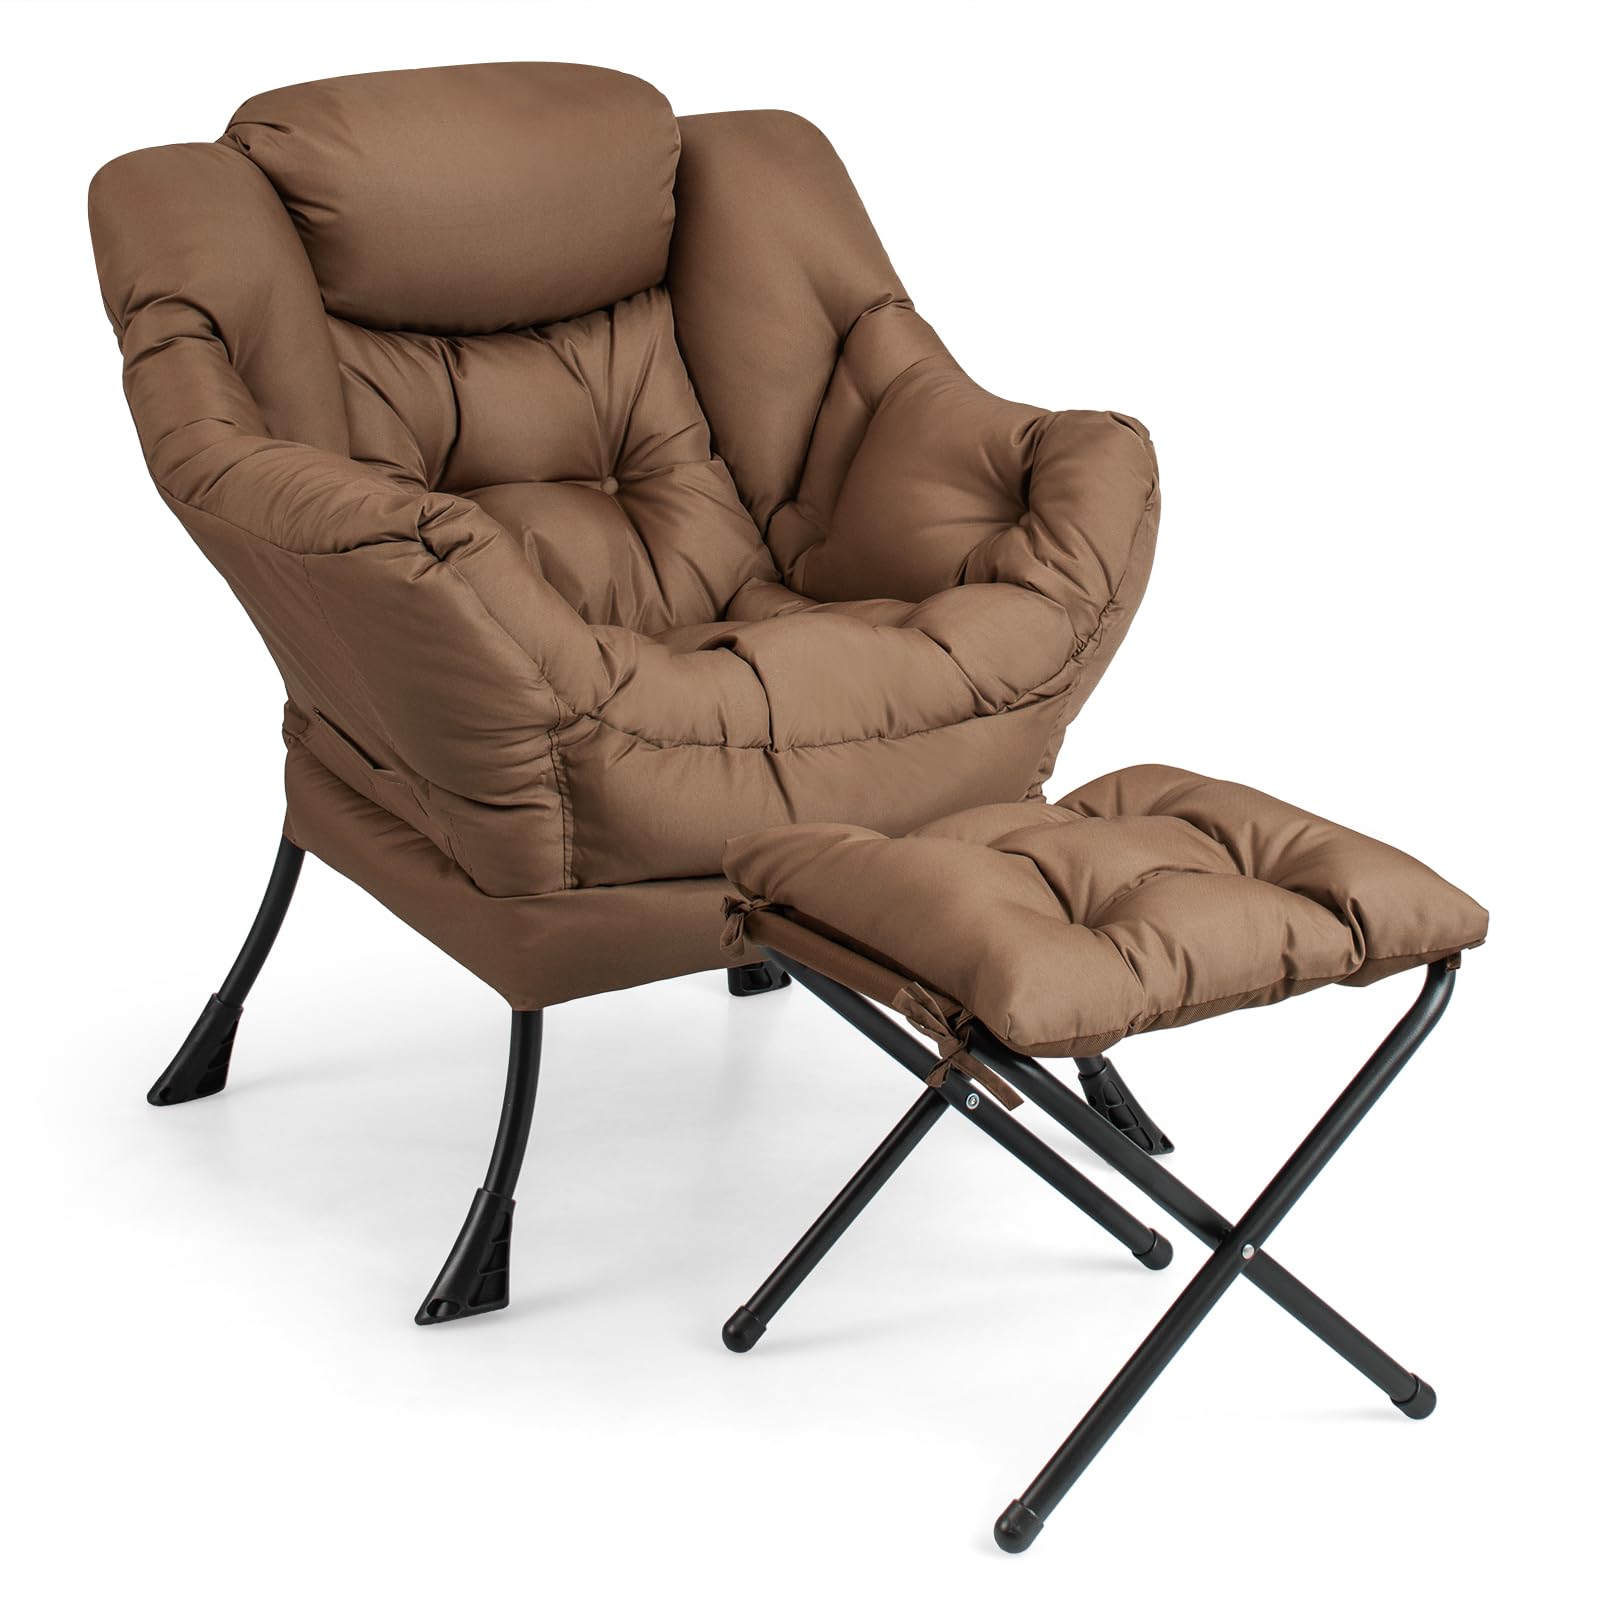 Giantex Modern Lazy Chair, Accent Contemporary Lounge Chair Polyester Fabric w/Steel Frame